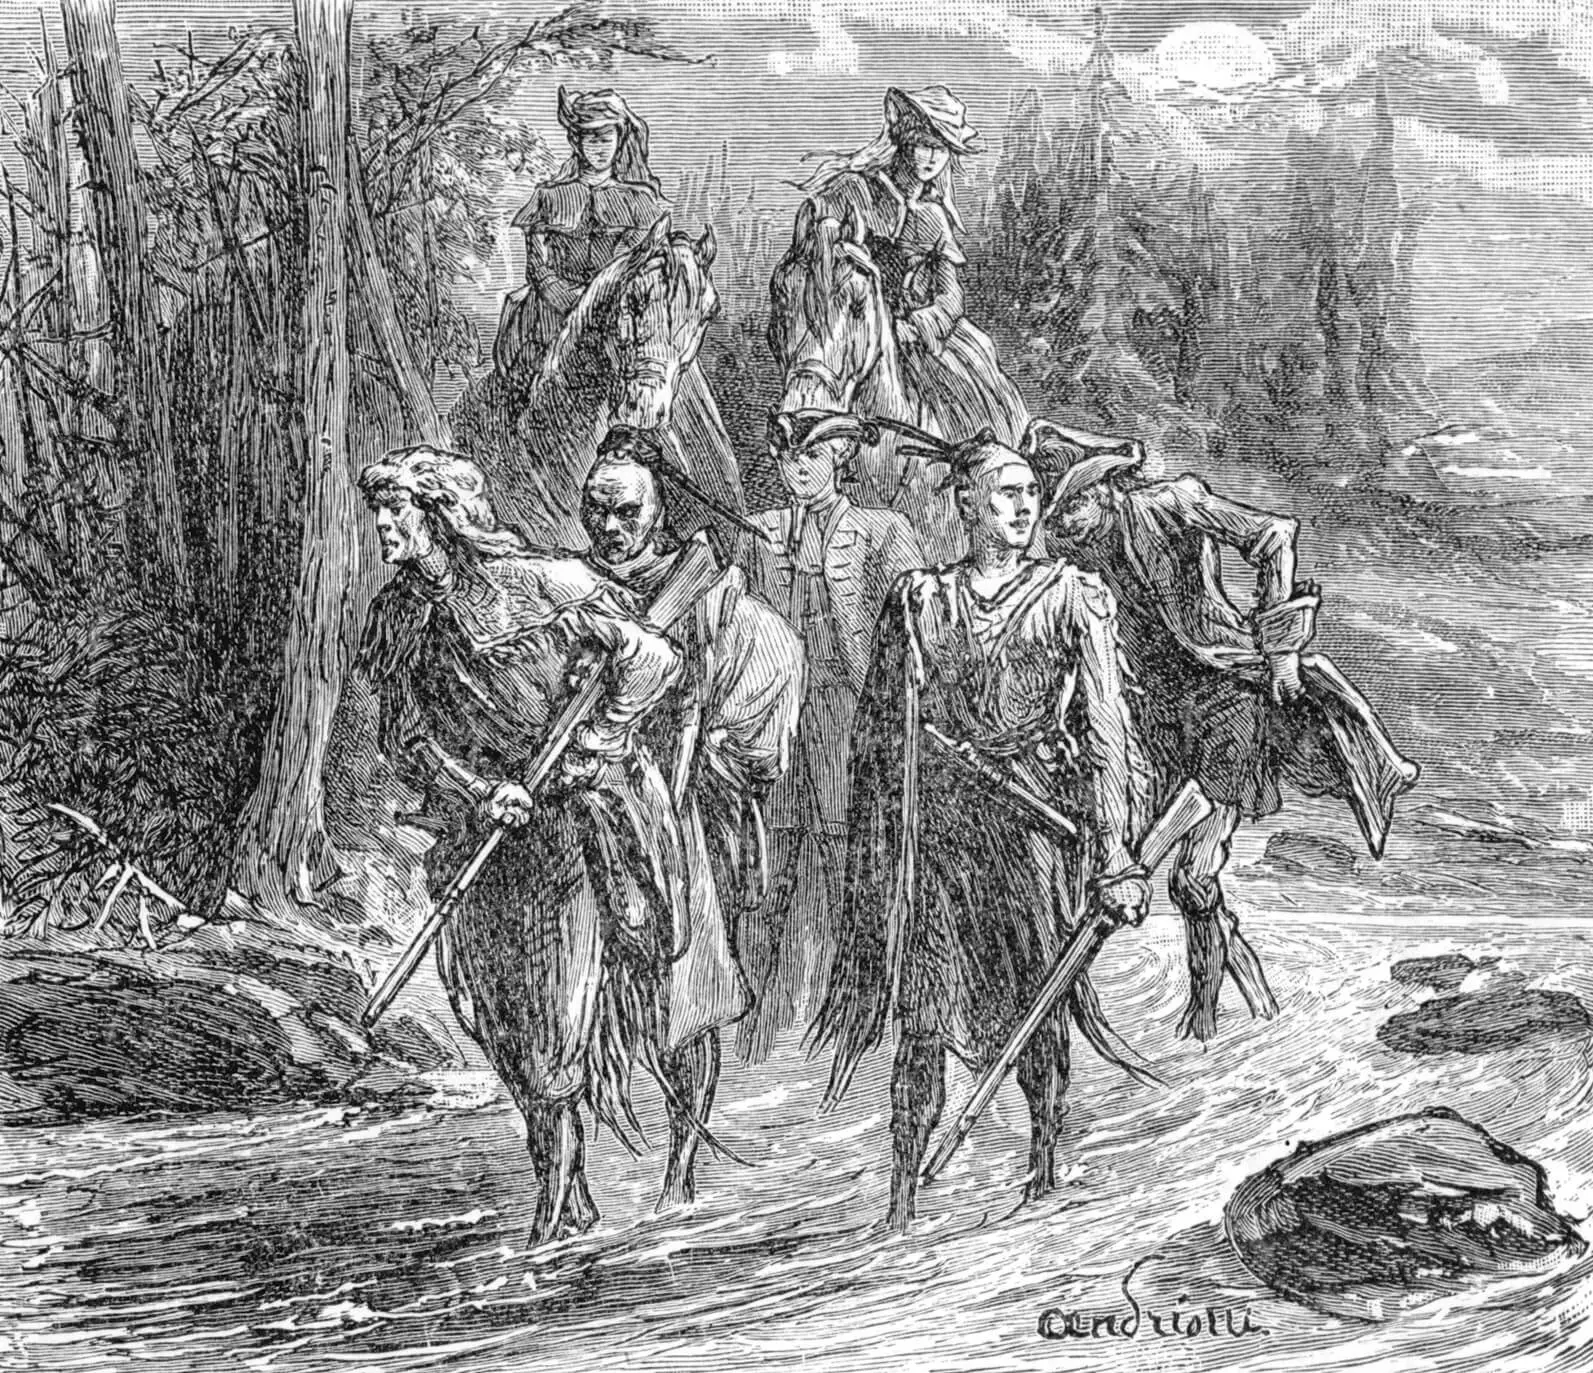 French hunters push westward into the American frontier hunting and trapping furs for trade in Europe.